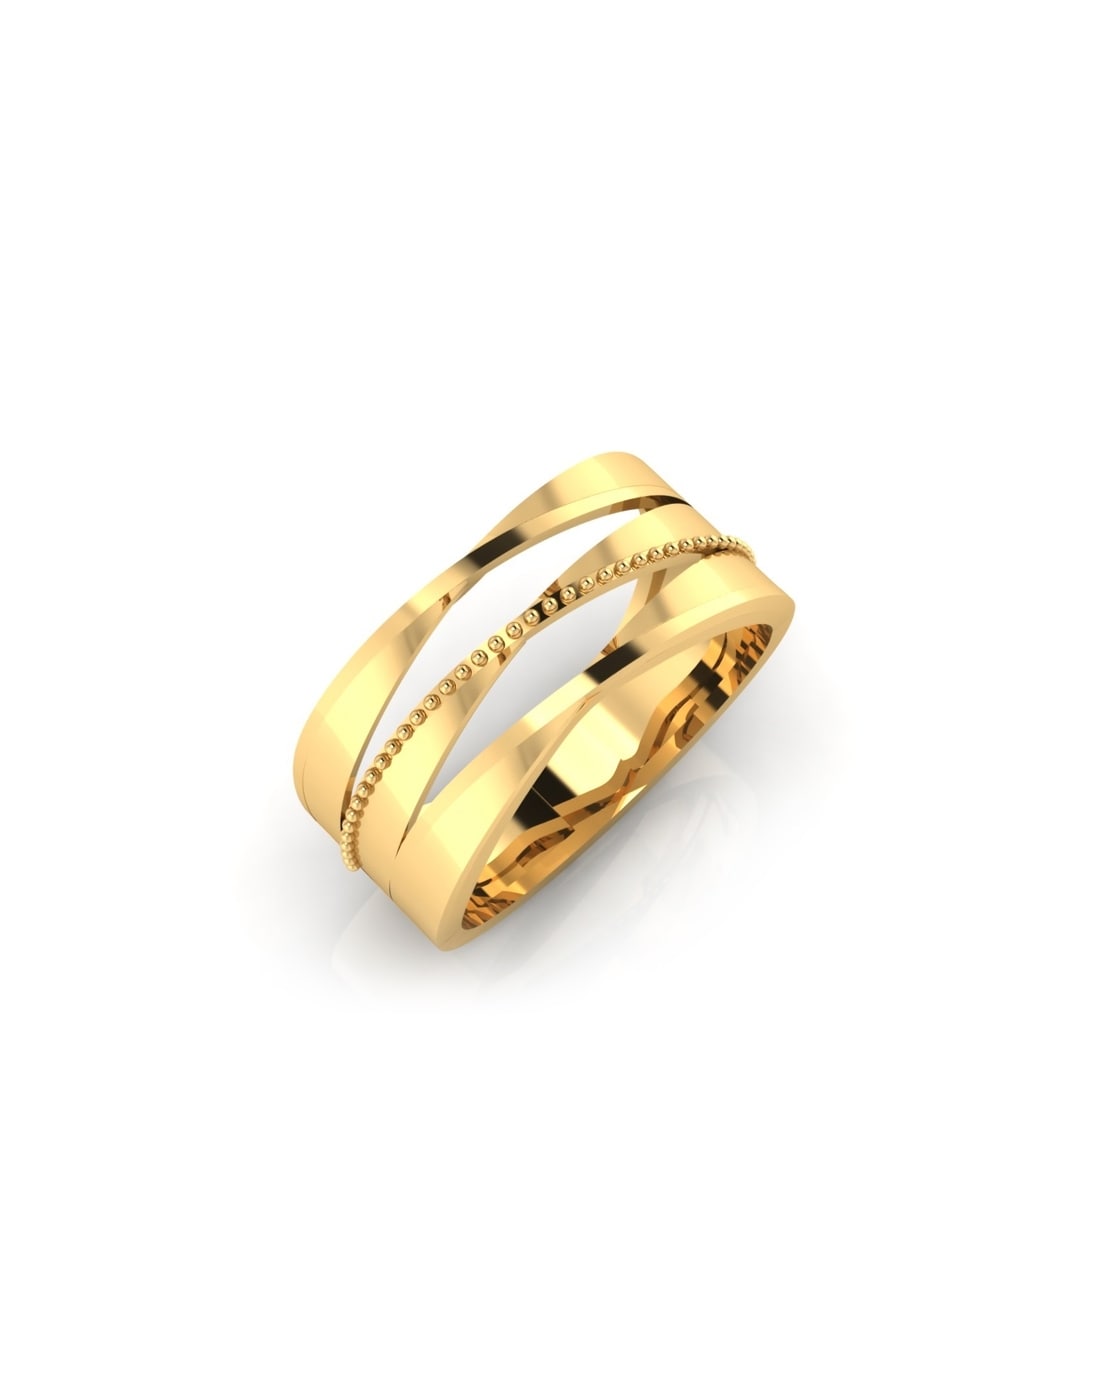 Light Weight Gold Ring Designs For Women With Weight | 21k Gold Ring |  Saudi Gold Ring Design | Ruby ring designs, Ring designs, Women rings